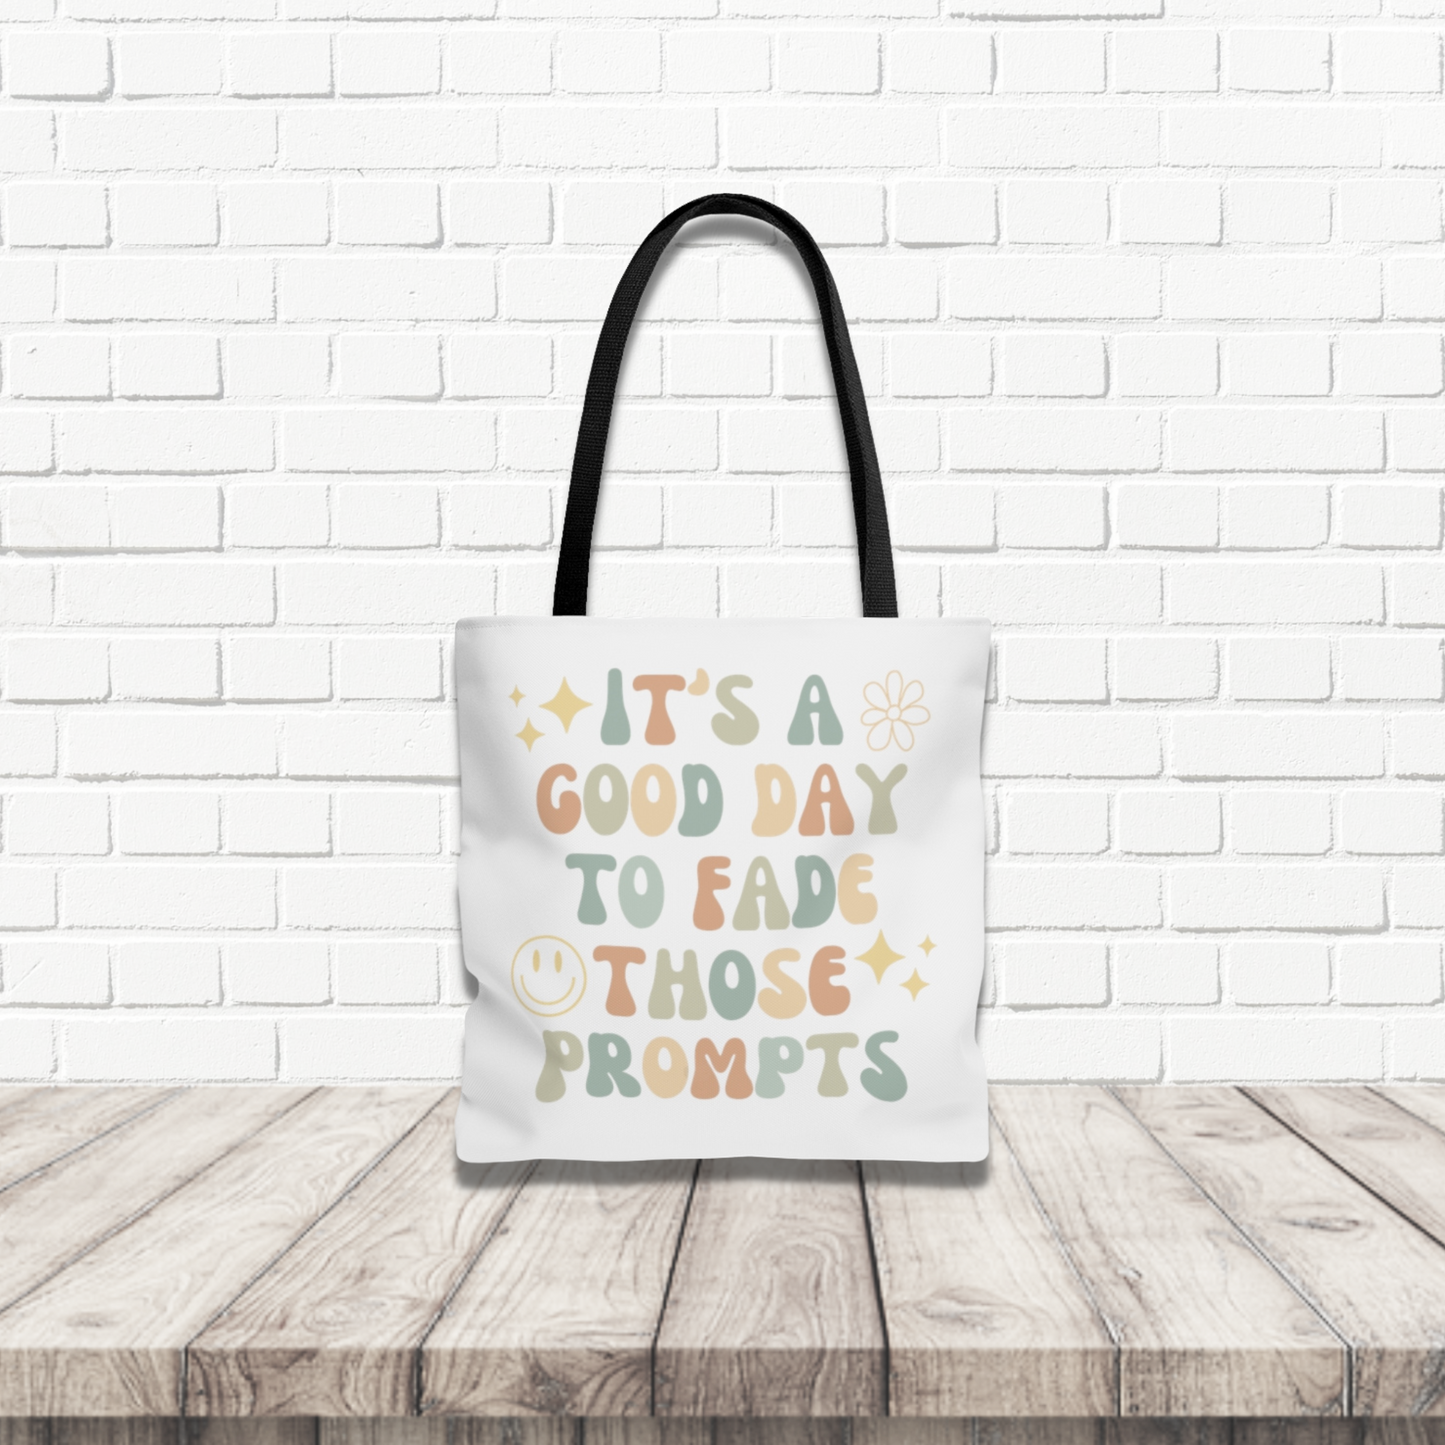 Good Day to Fade Those Prompts Tote Bag | Teacher Tote Bag | Therapist Tote Bag | Behavior analysis tote bag | Behavior Analyst